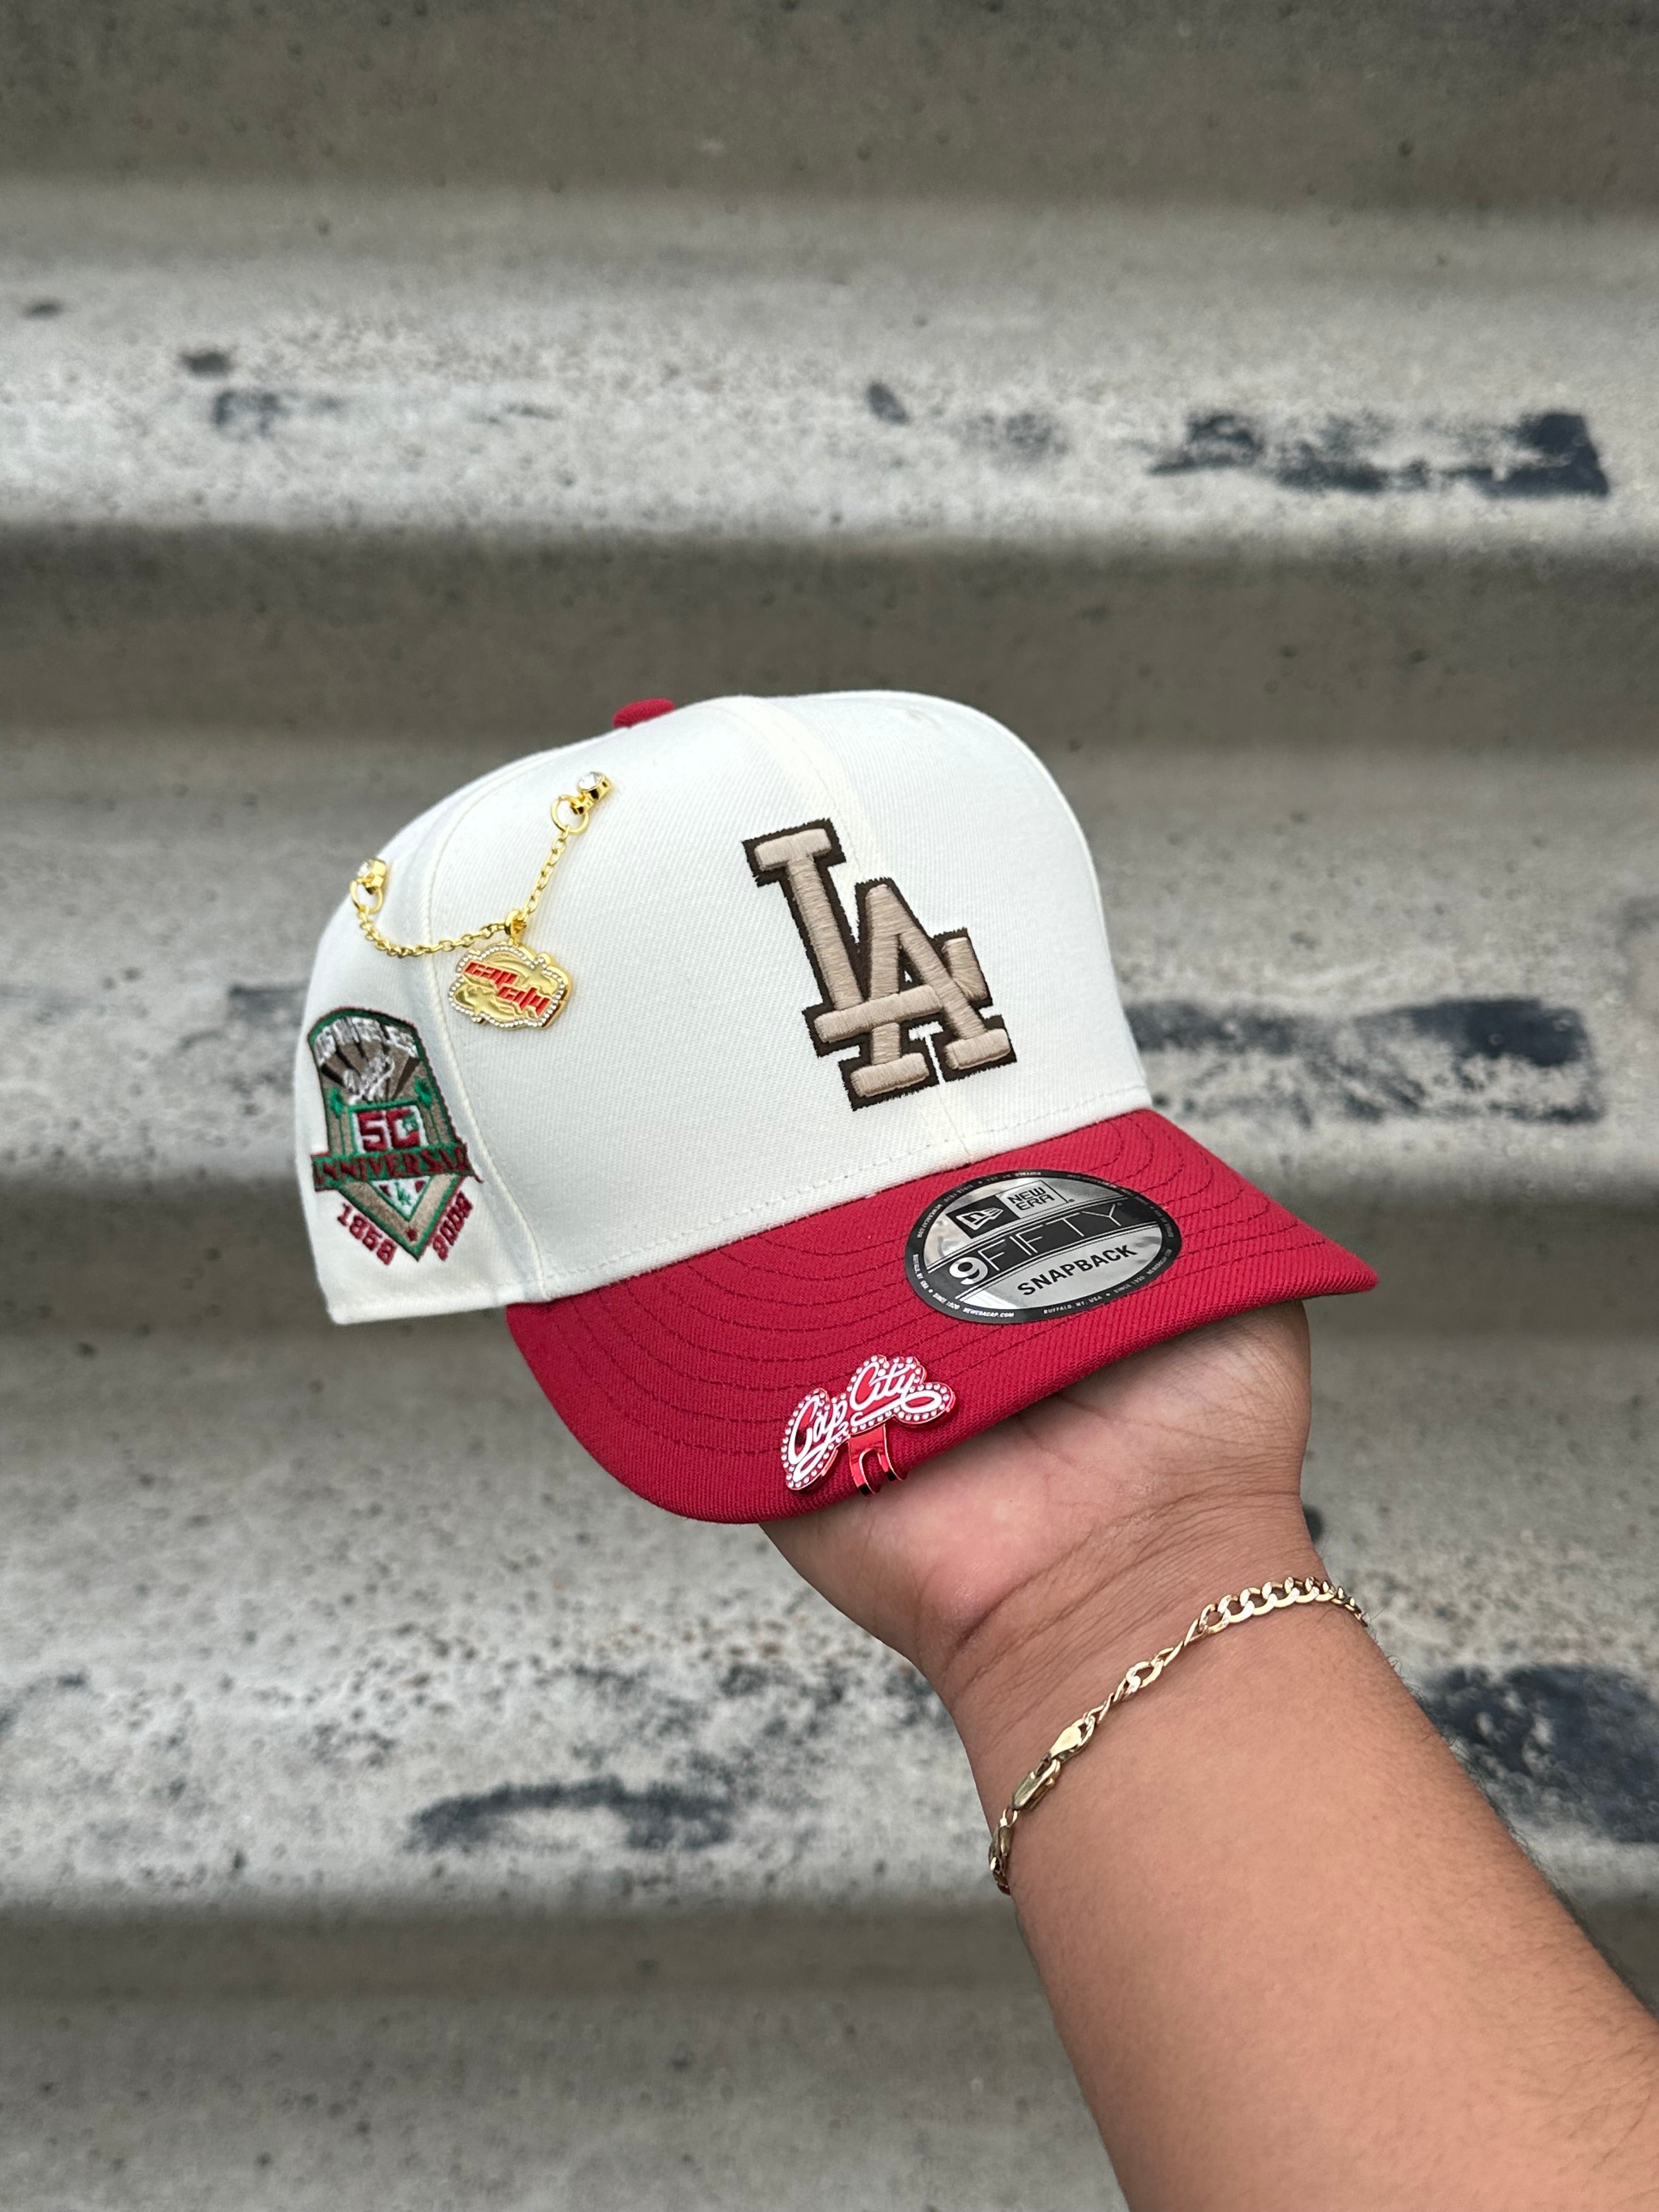 NEW ERA EXCLUSIVE 9FIFTY CHROME WHITE/RED LOS ANGELES DODGERS SNAPBACK W/ 50TH ANNIVERSARY PATCH